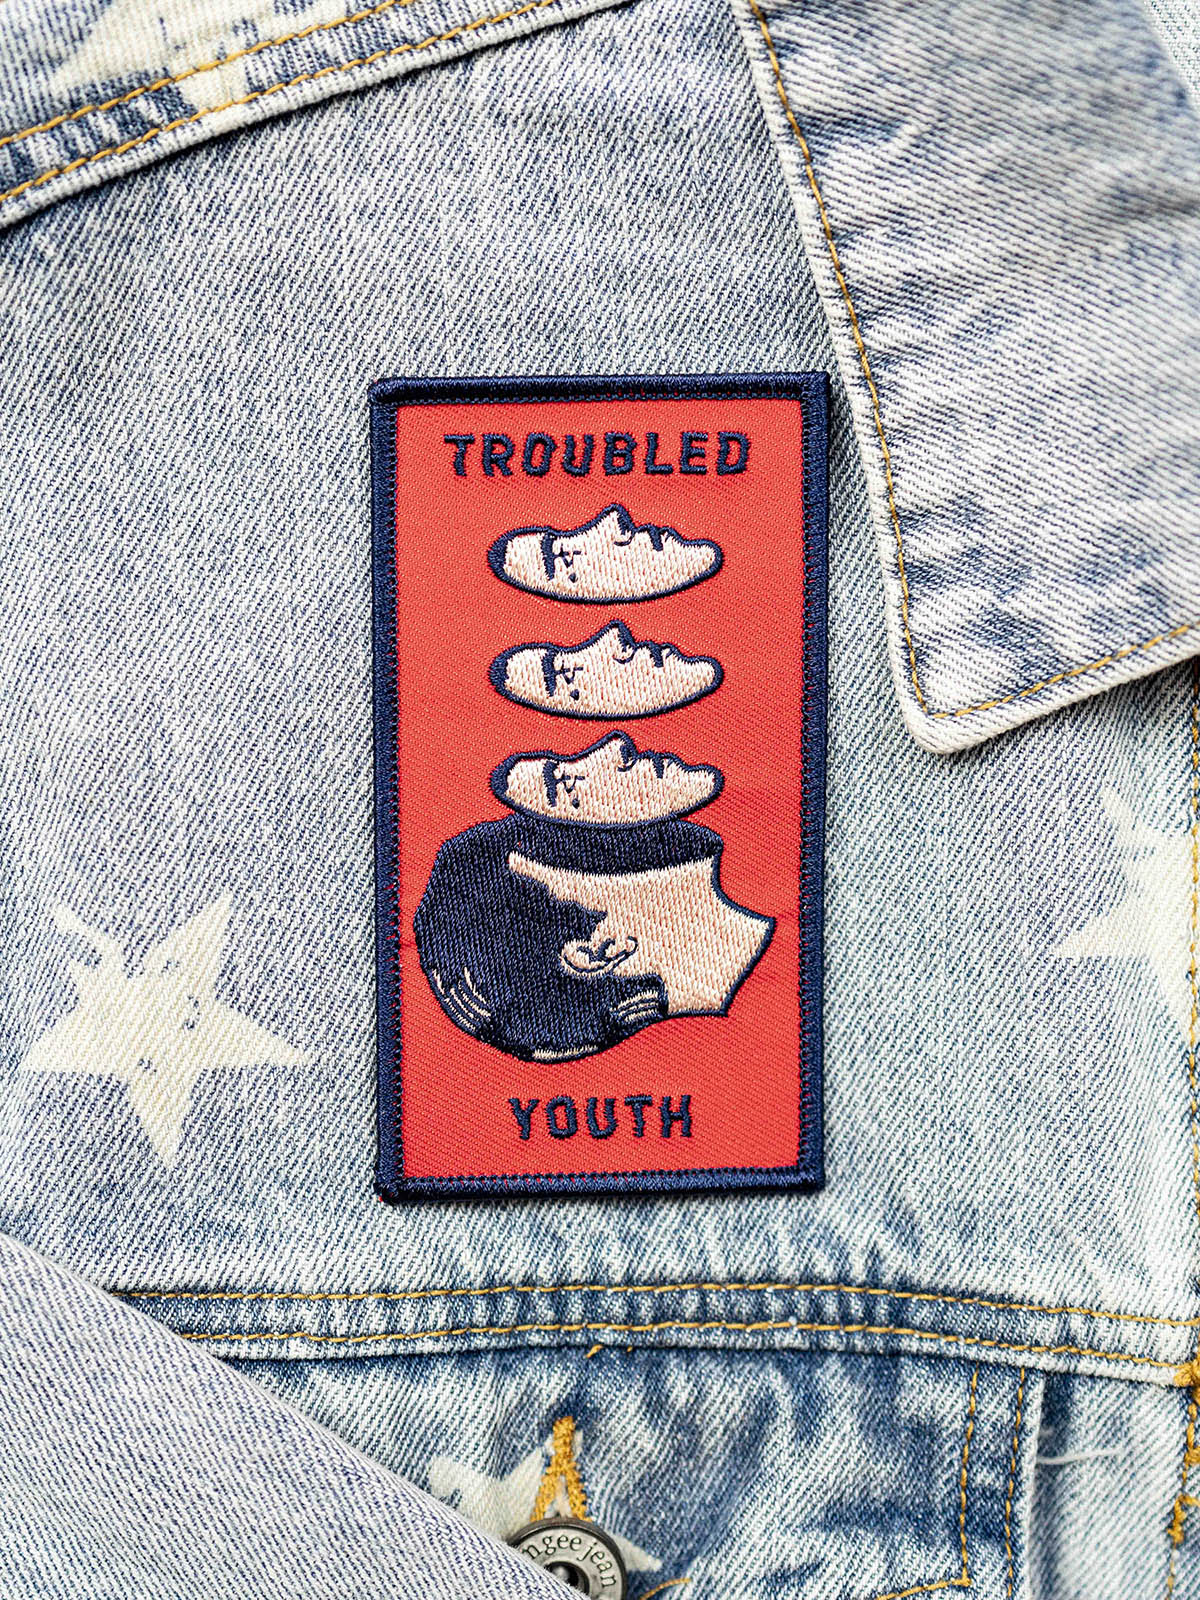 Troubled Youth Patch